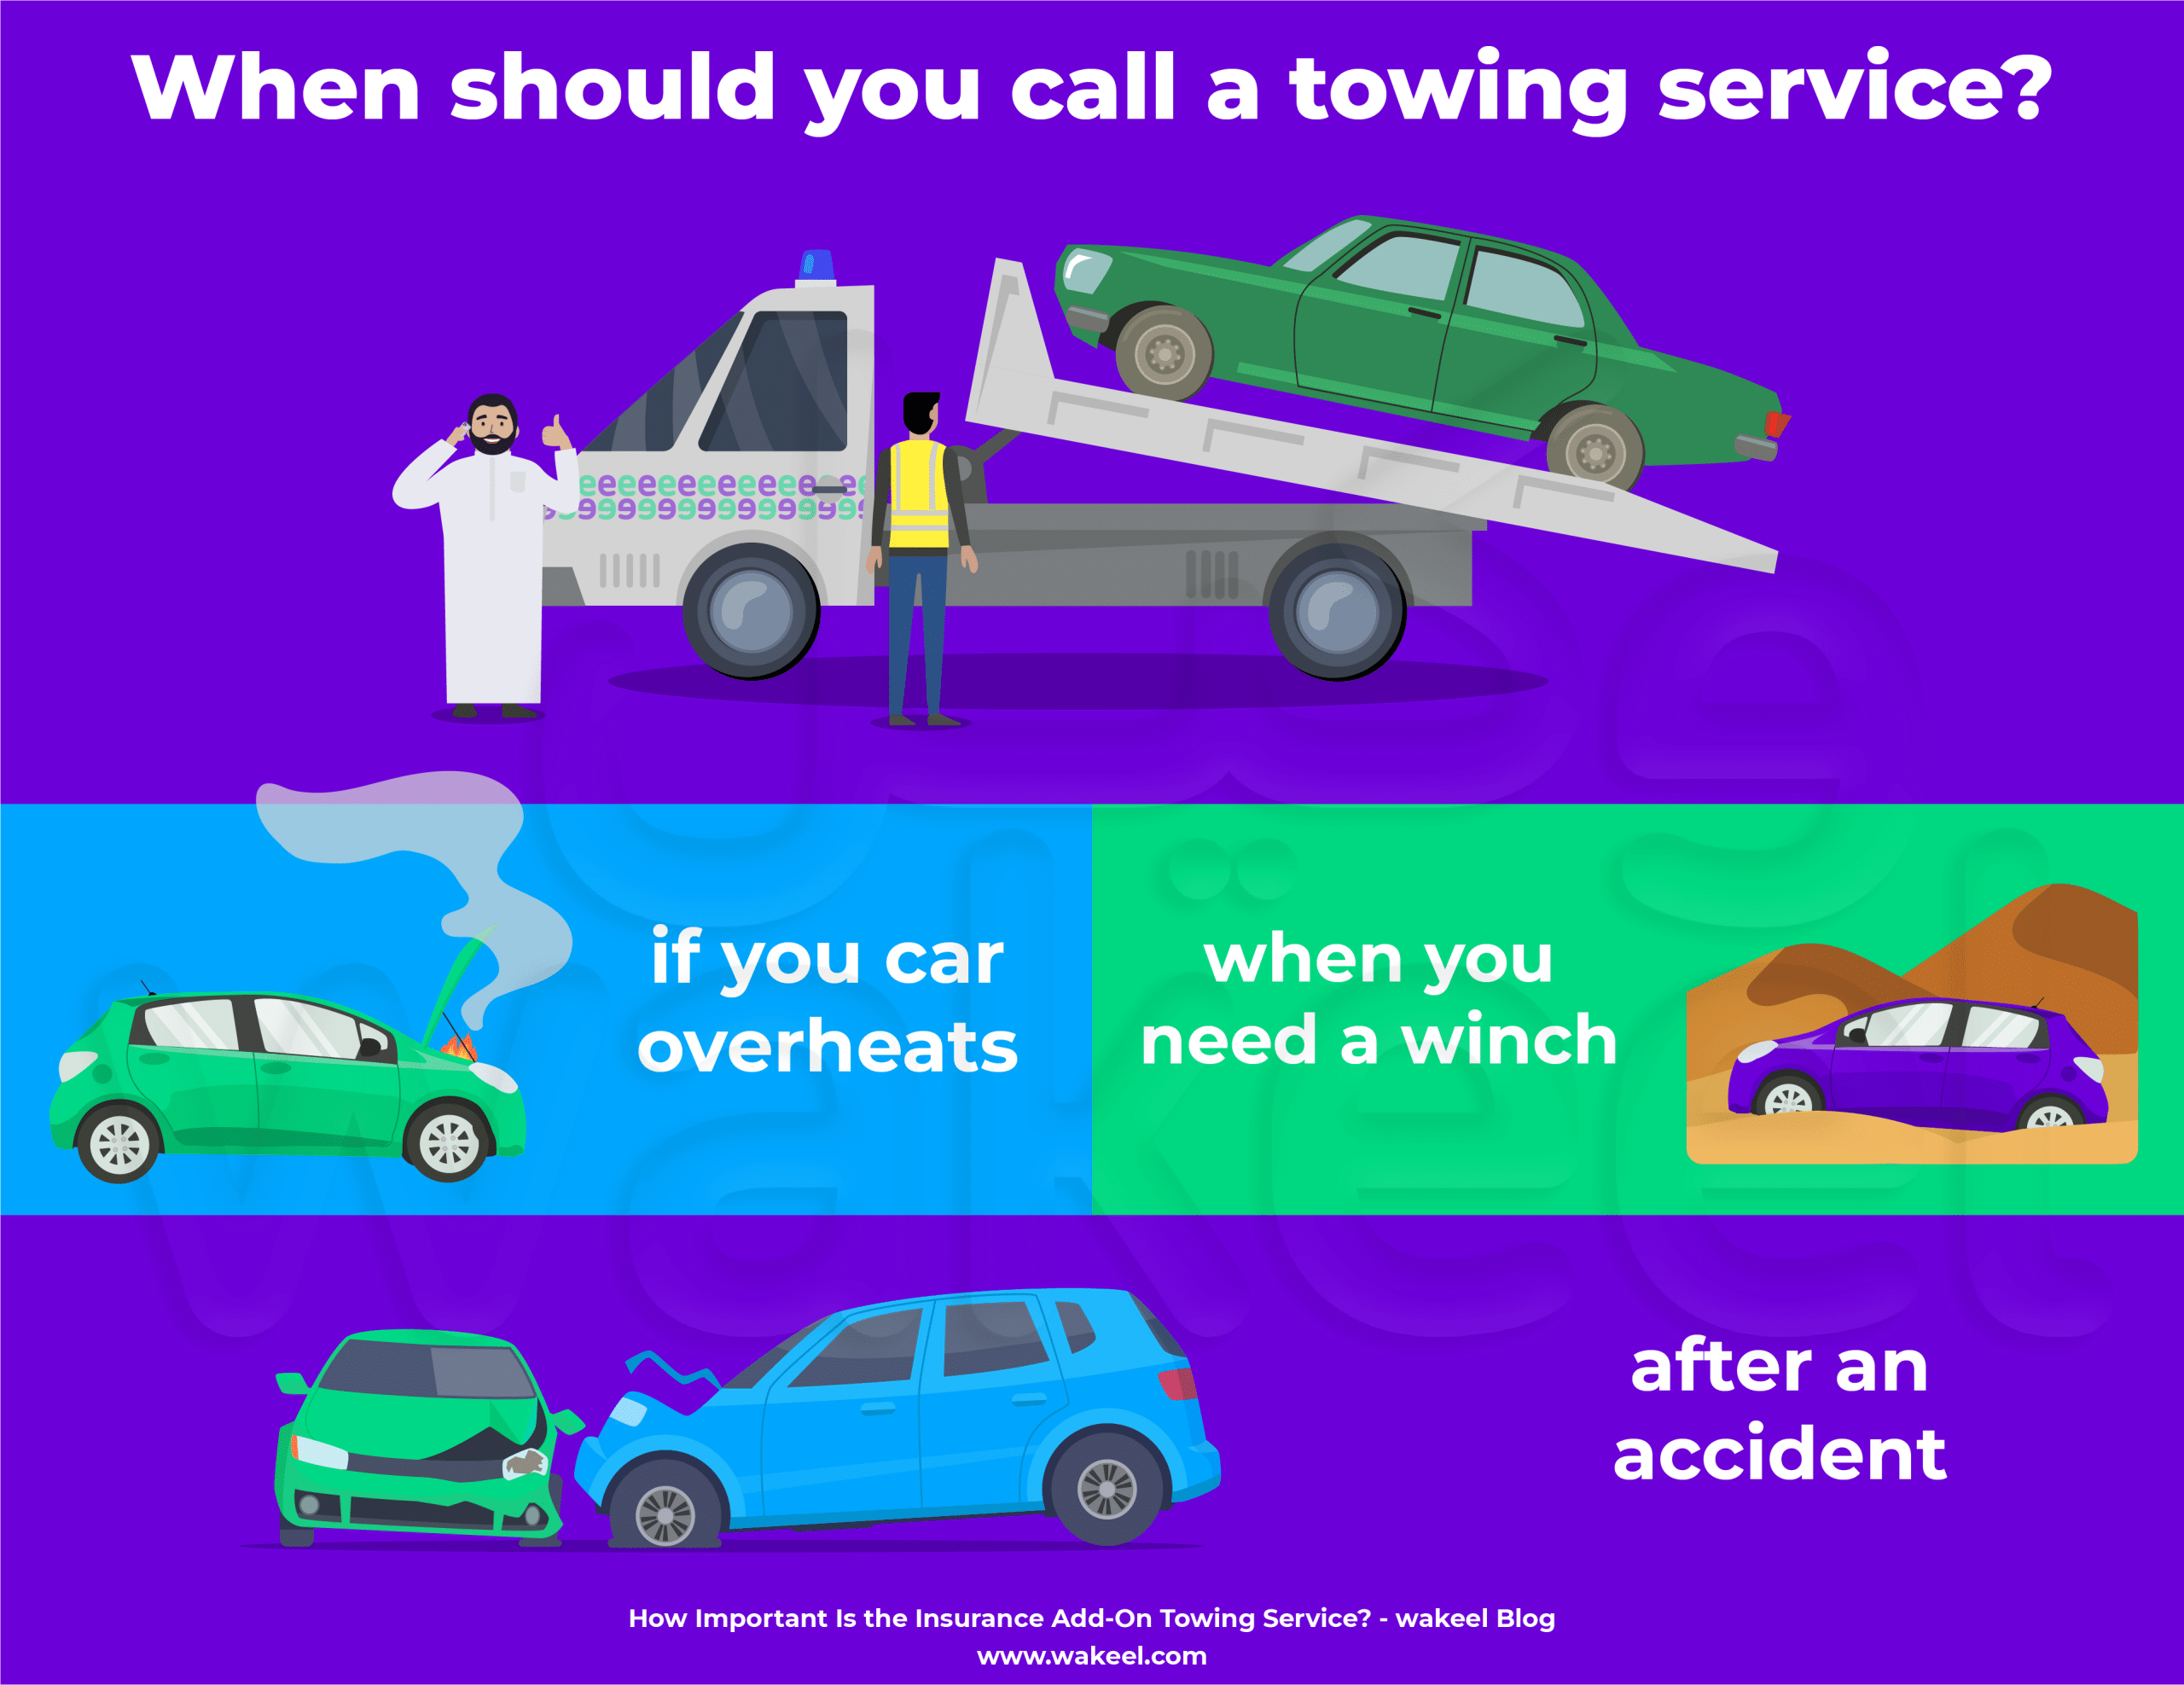 Infographic displaying scenarios where calling roadside assistance is essential, including flat tire, engine breakdown, after a car accident, or when the car is stuck. Each situation is depicted with clear icons and concise descriptions.